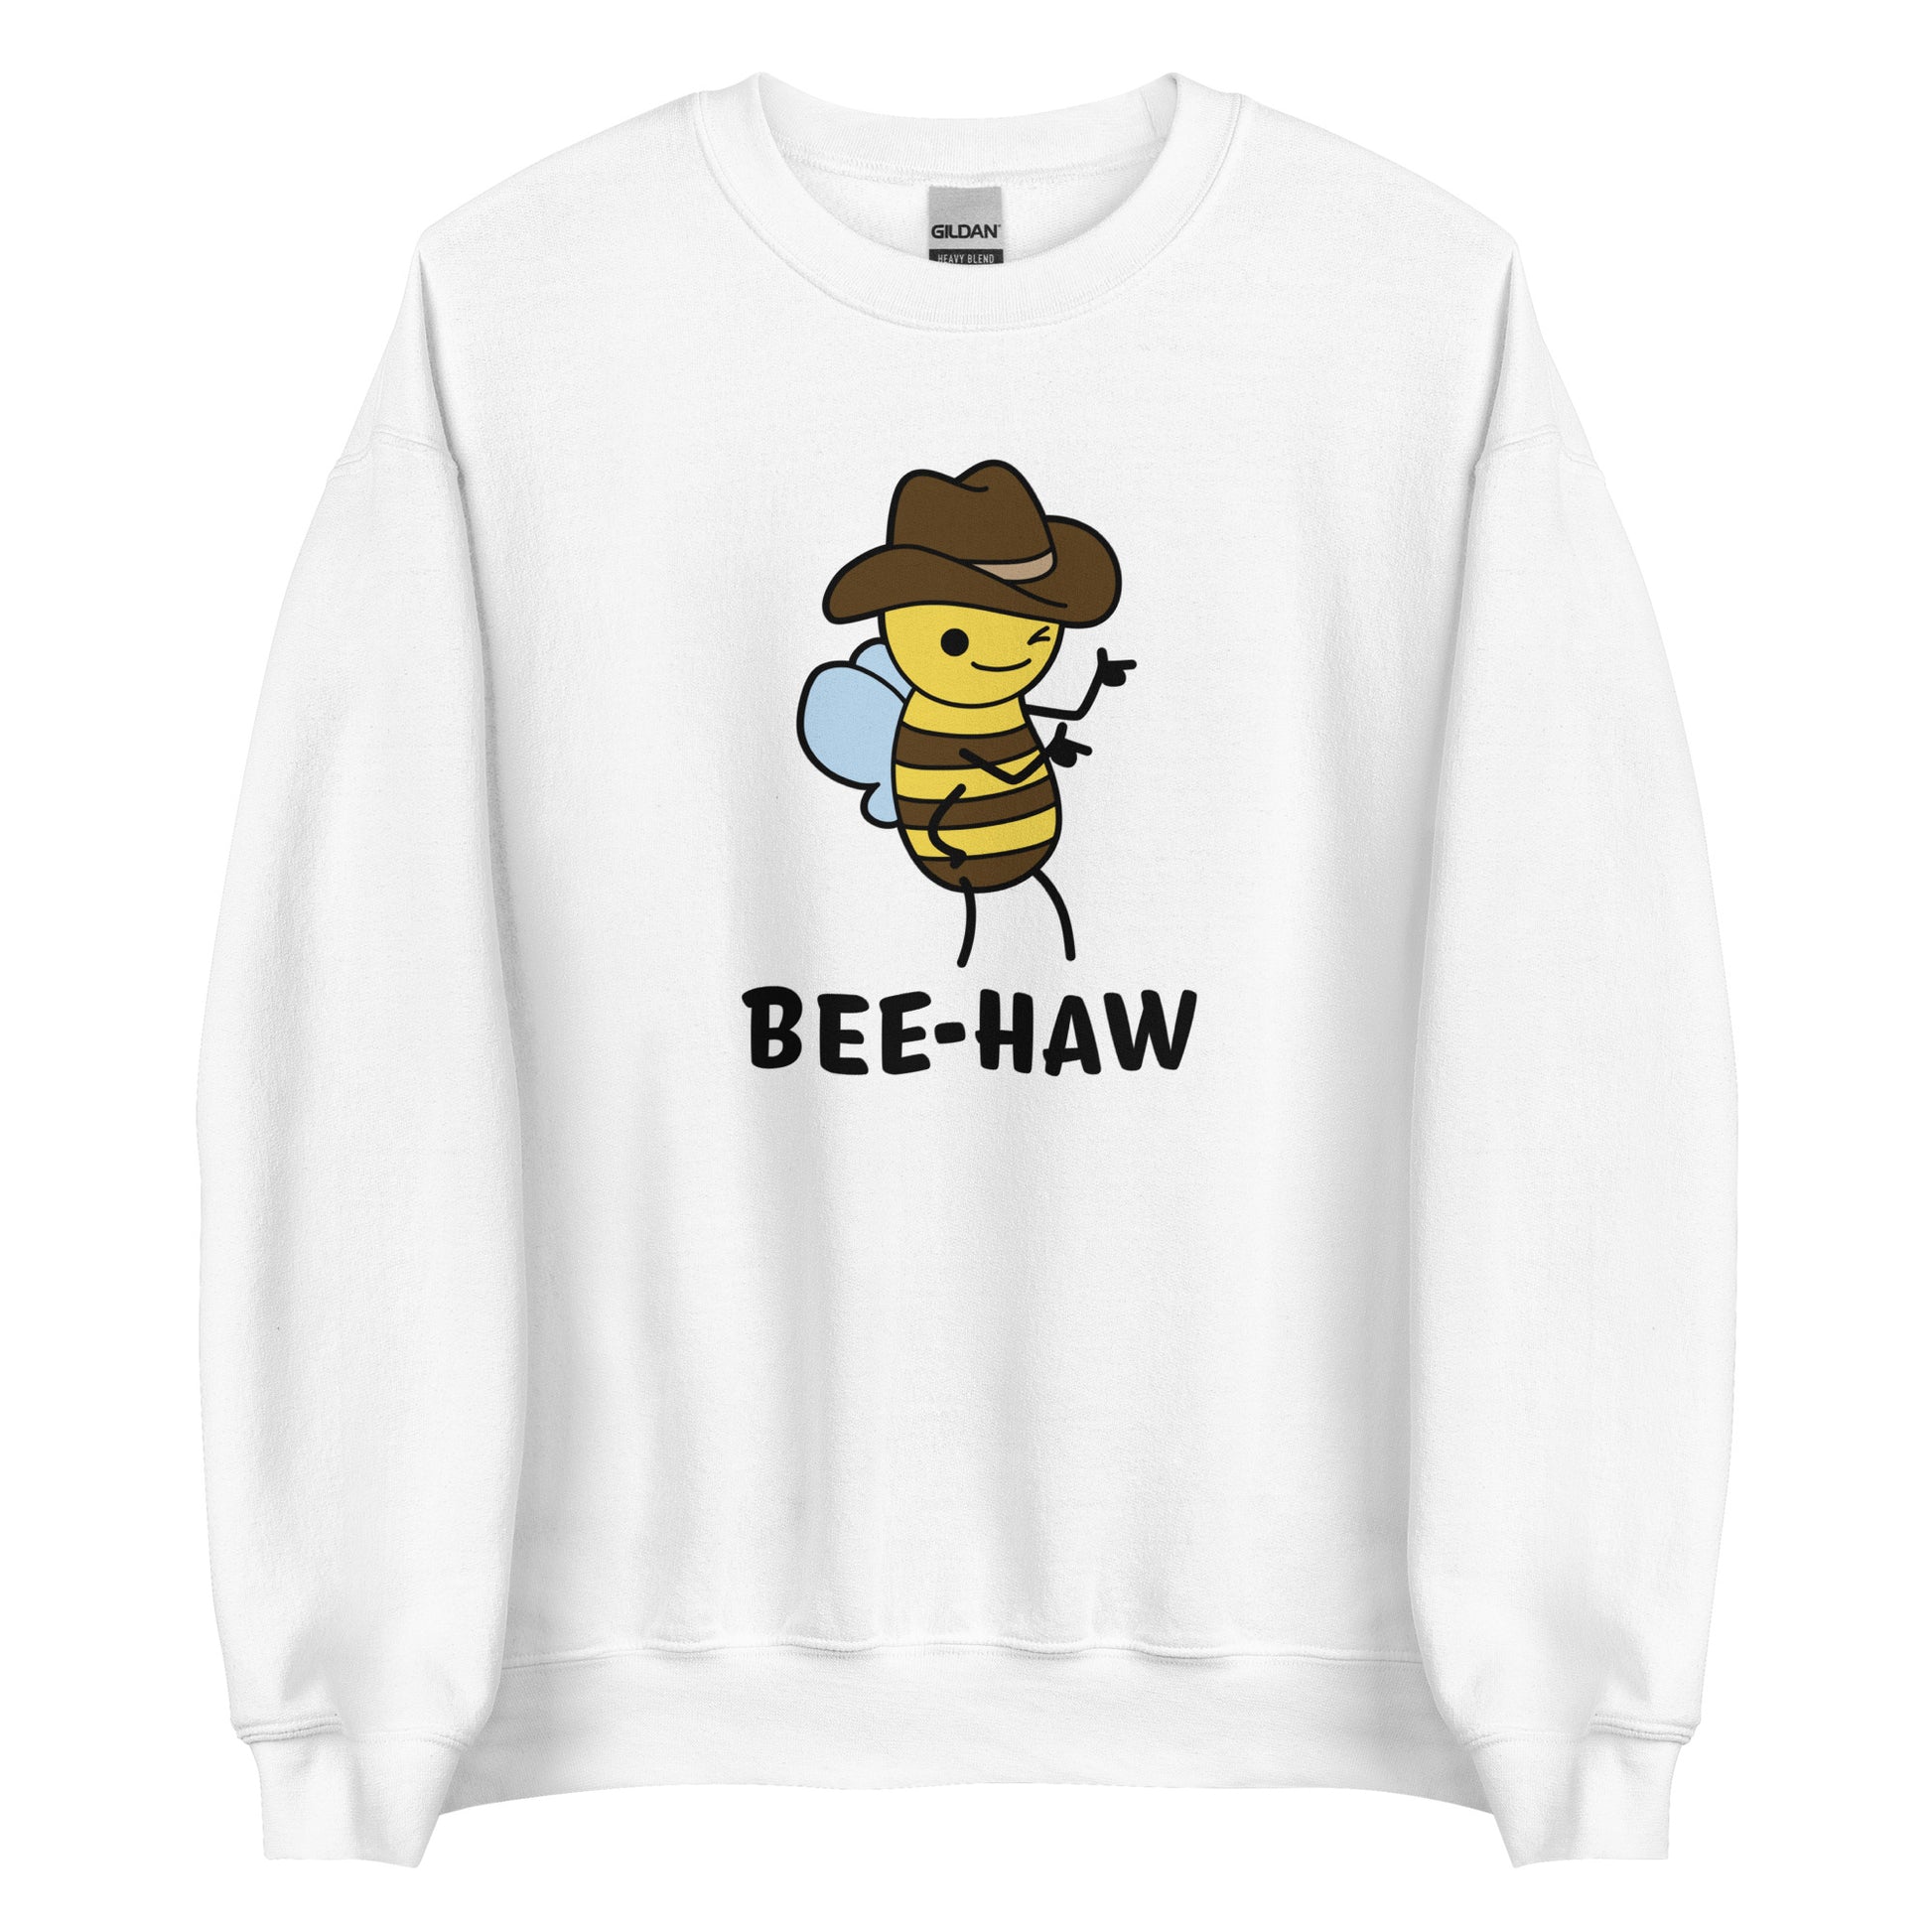 A white crewneck sweatshirt featuring an image of a bee in a cowboy hat. The bee is winking and holding up "finger guns". Text beneath the bee reads "Bee-Haw"